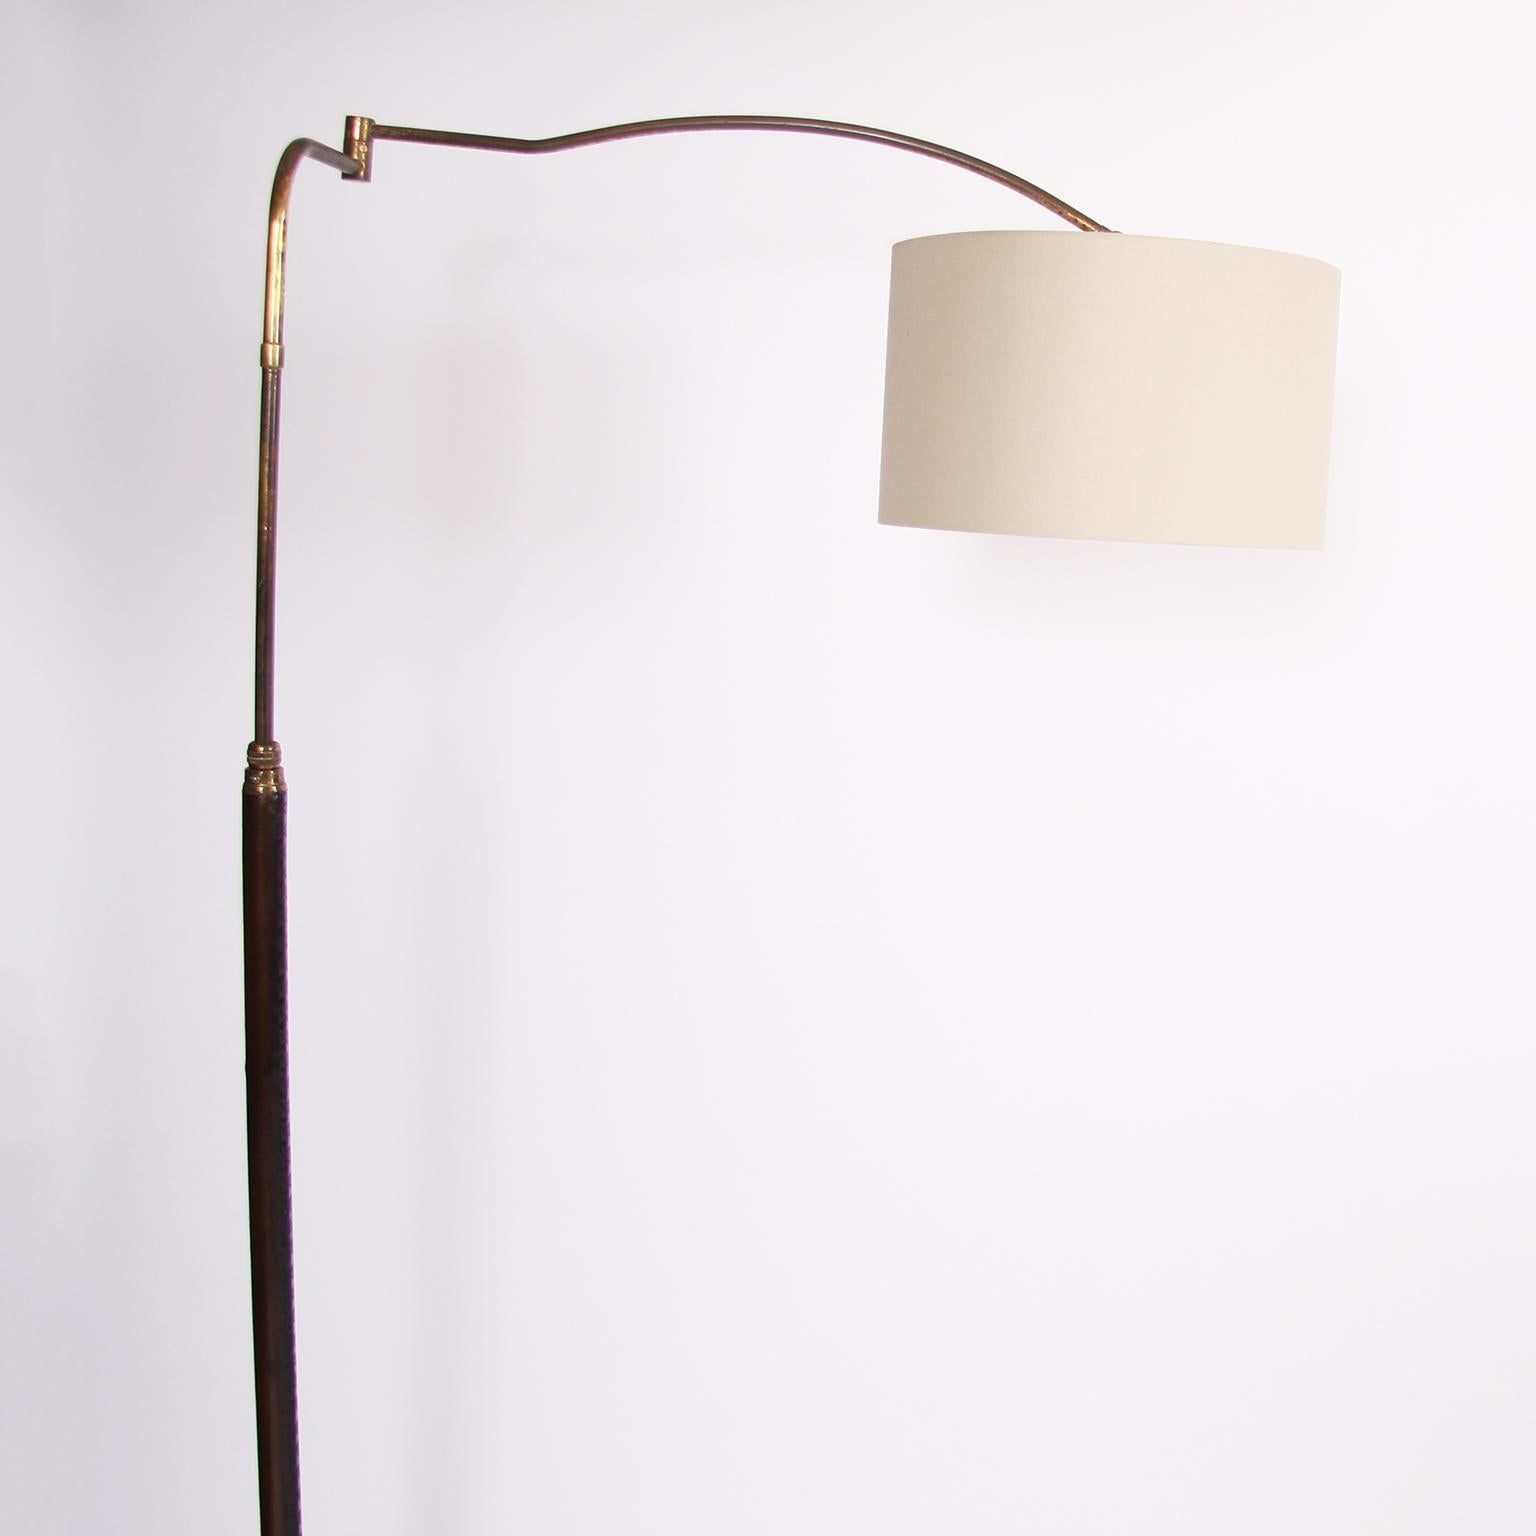 Italian Mid-20th Century Brass and Leather-Covered Swing Arm Floor Lamp